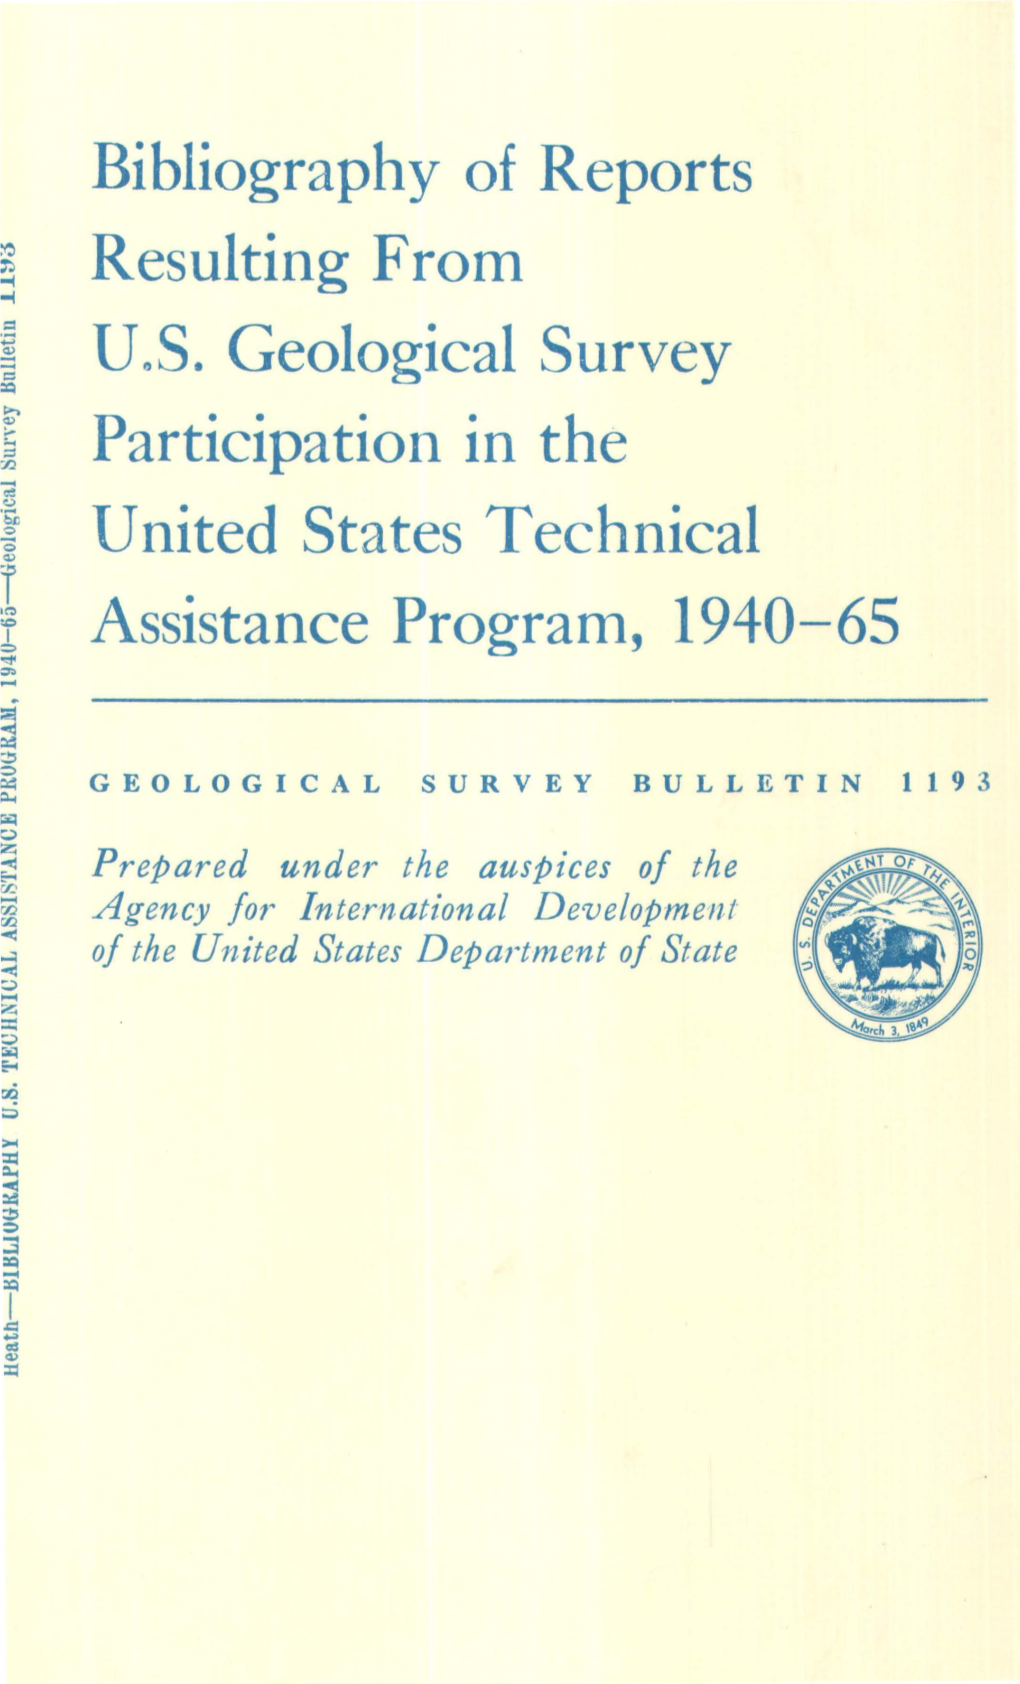 Bibliography of Reports Resulting from U.S. Geological Survey Participation in the United States Technical Assistance Program, 1940-65